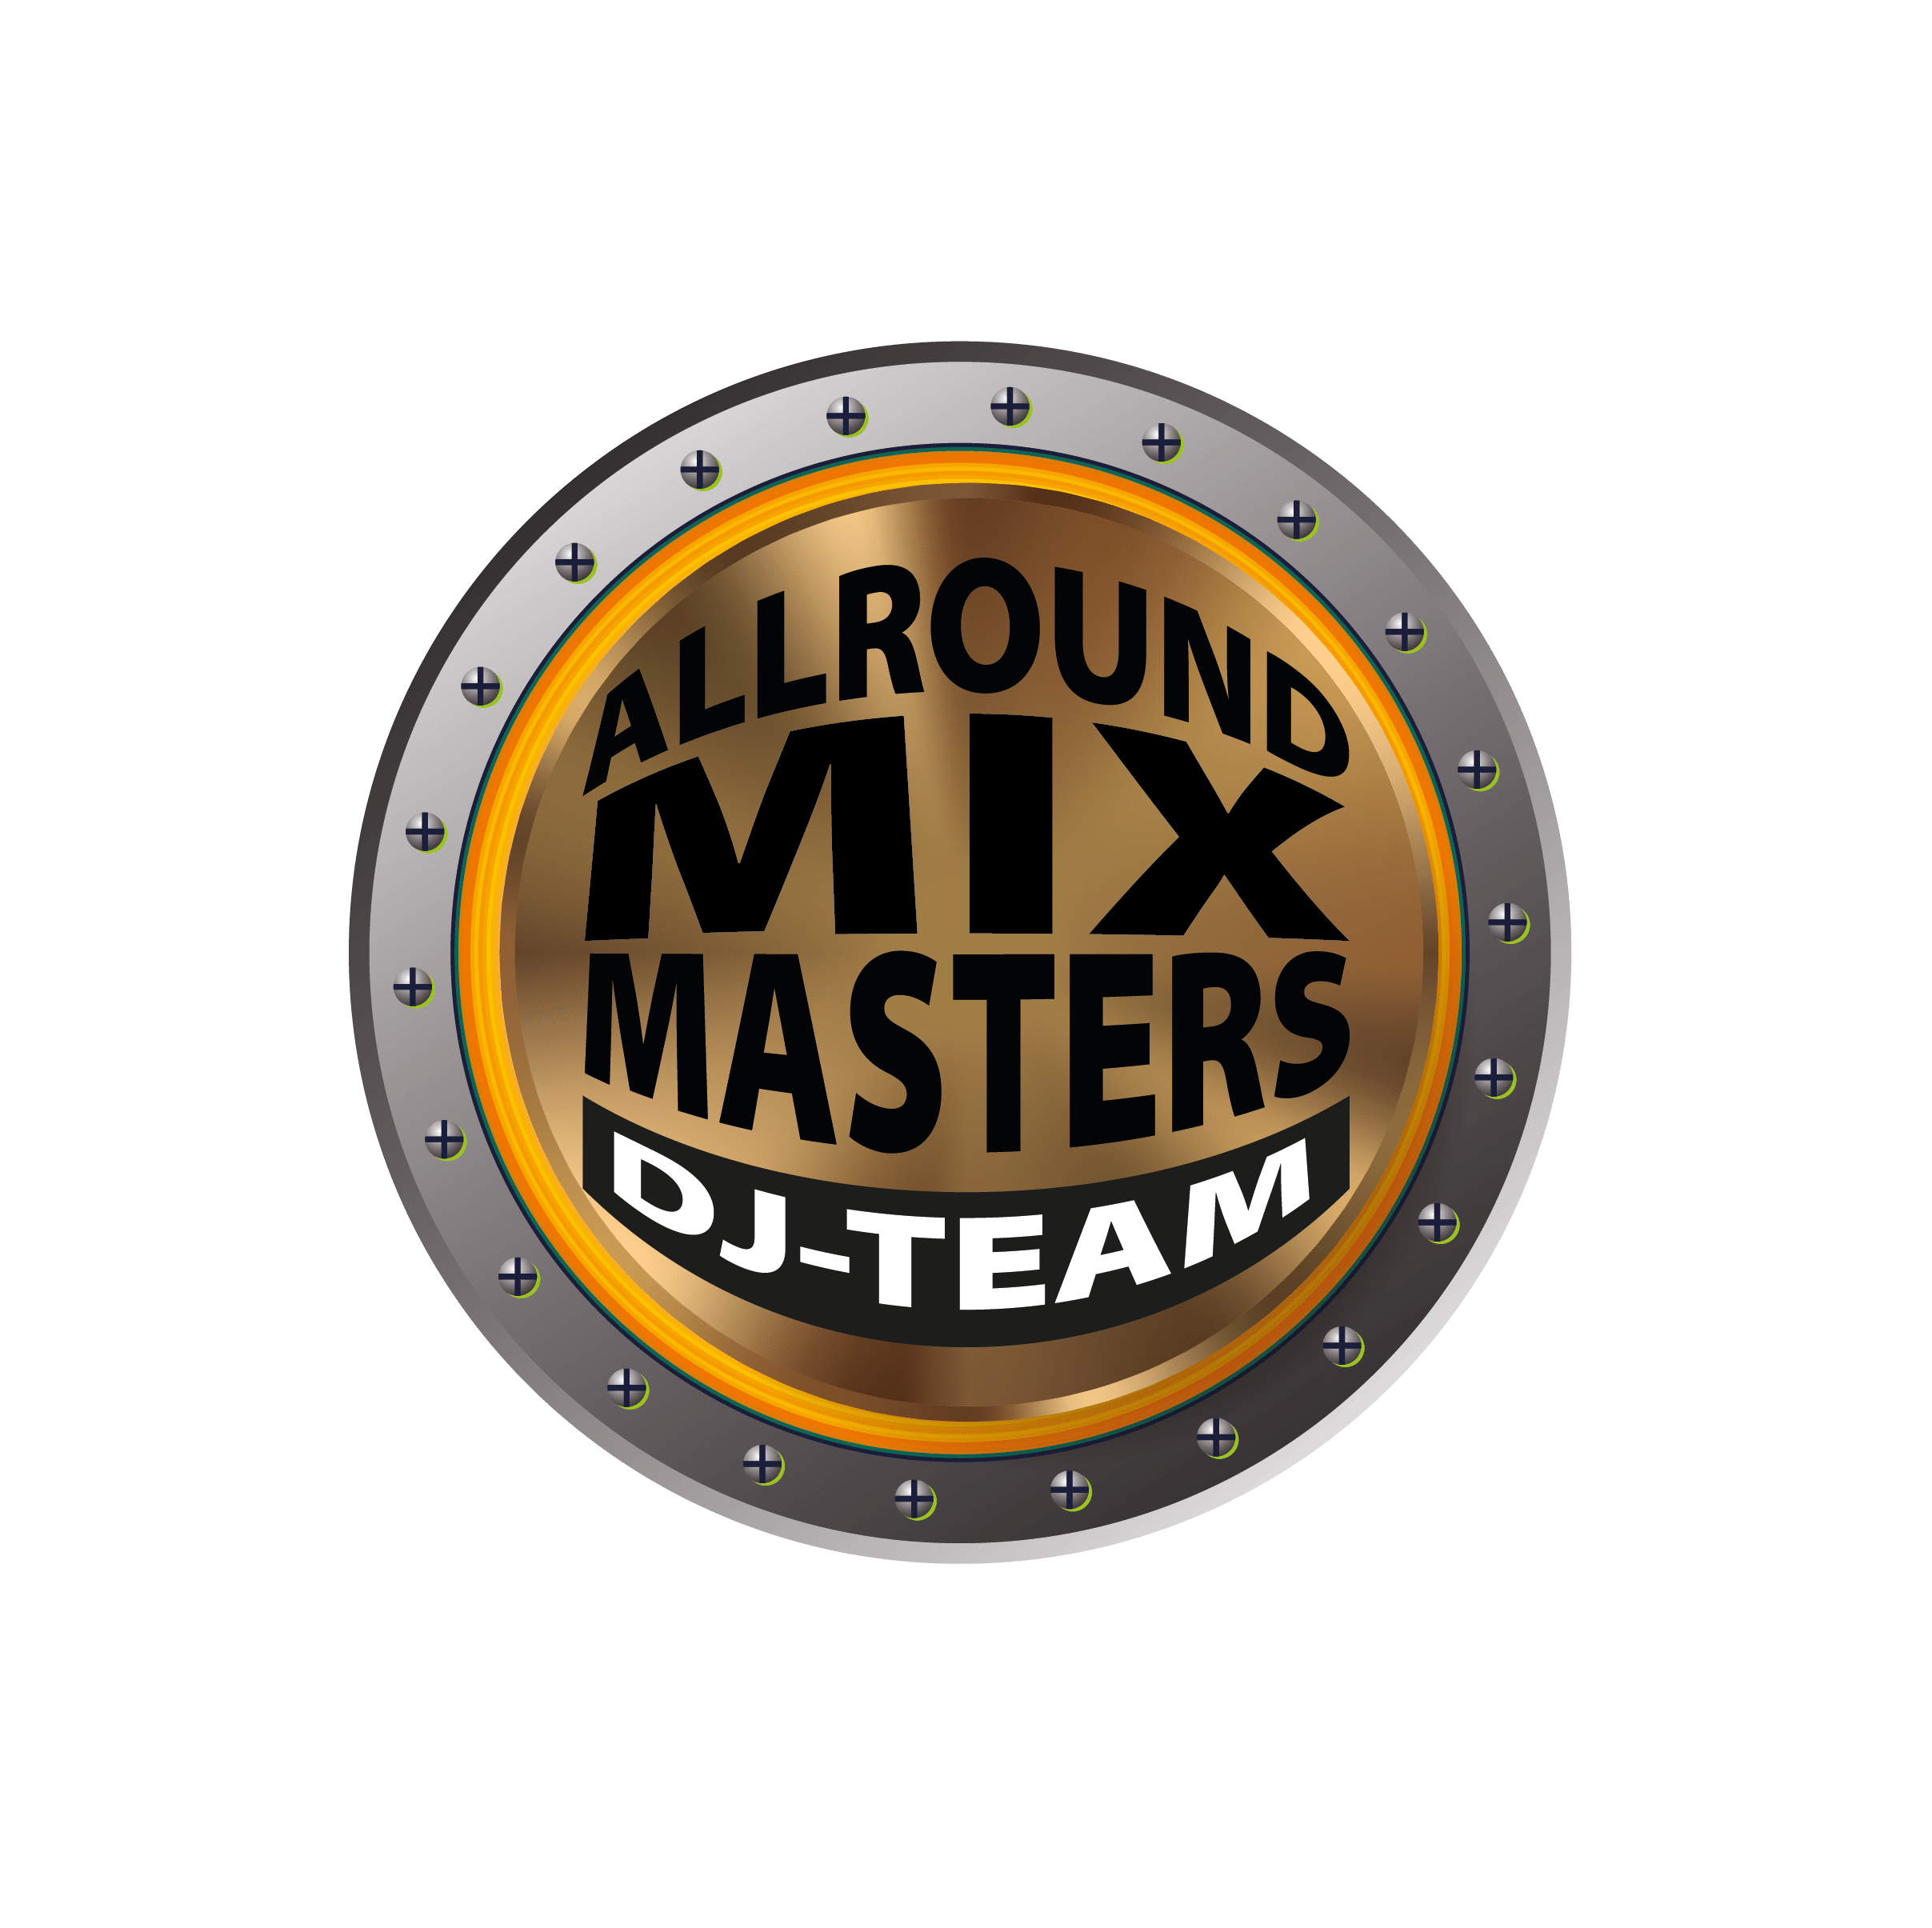 https://www.mixmasters.be